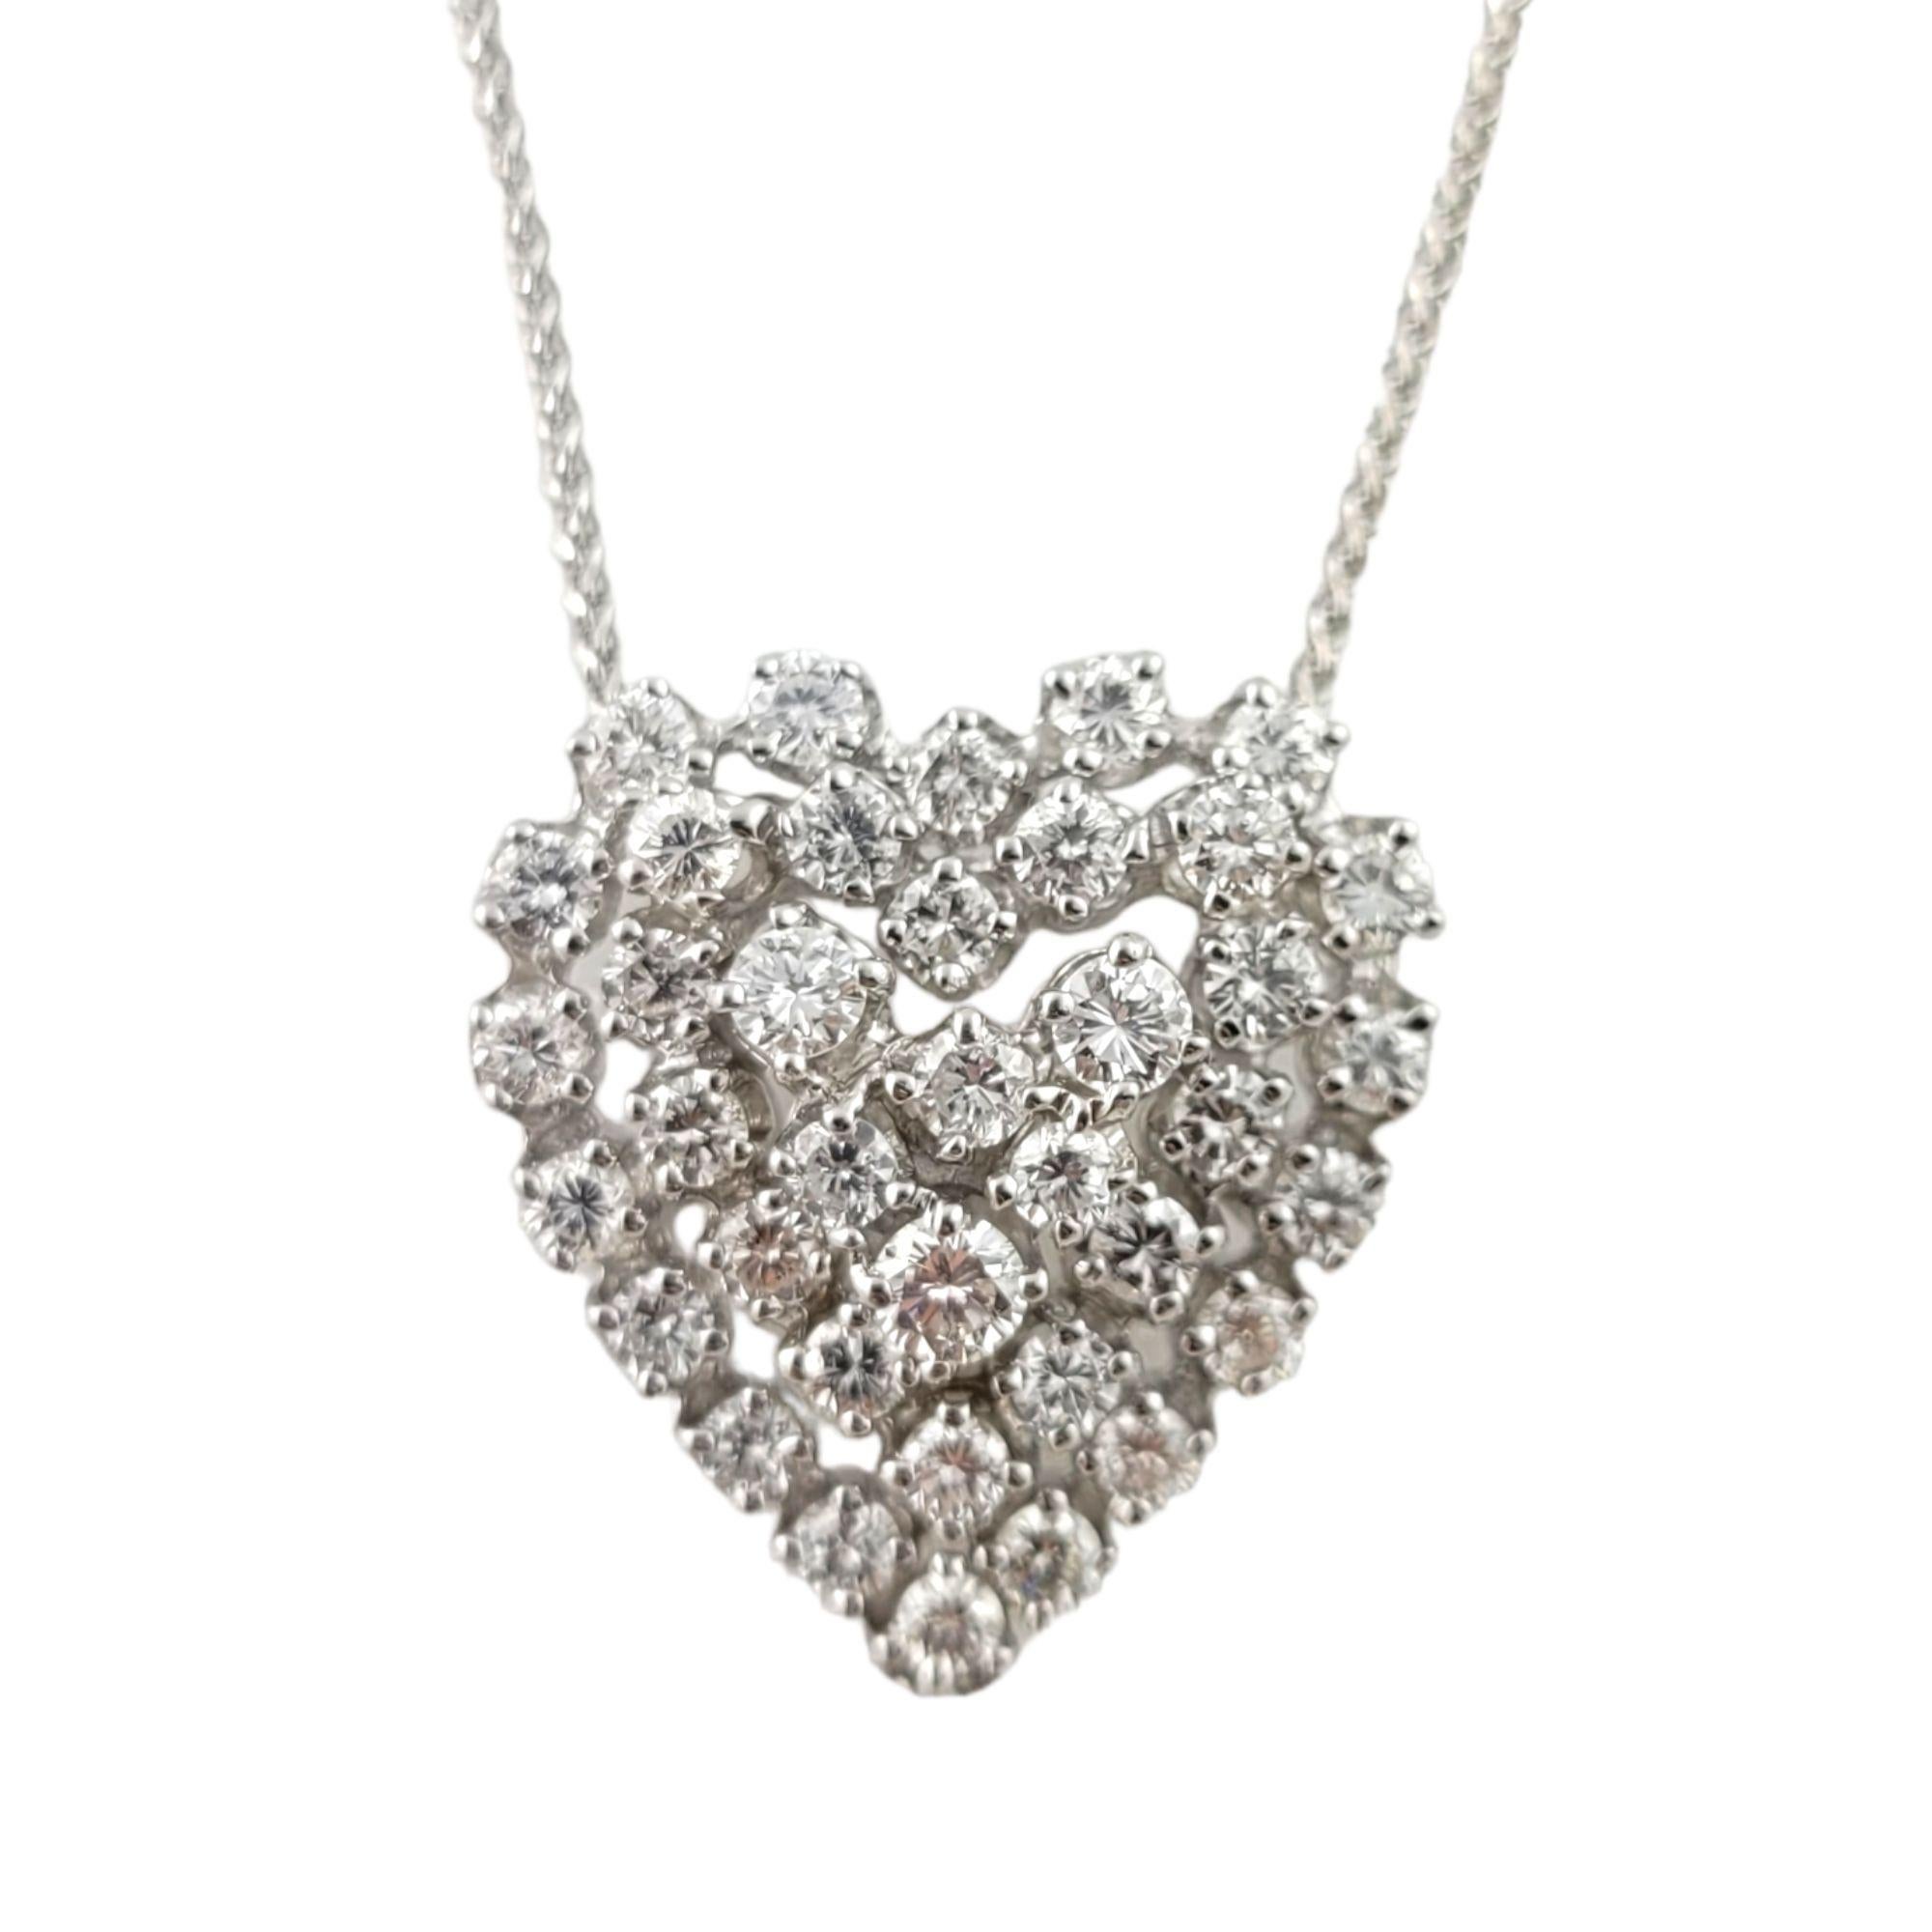 14K White Gold Diamond Heart Pendant Necklace

This gorgeous heart pendant sparkles with 38 round brilliant diamonds set in 14K white gold.

Diamond carat weight: 2.30cts
Diamond Clarity: SI2 - I1
Diamond Color: G-H

Pendant is 2.6mm x 2.5mm x 1.53